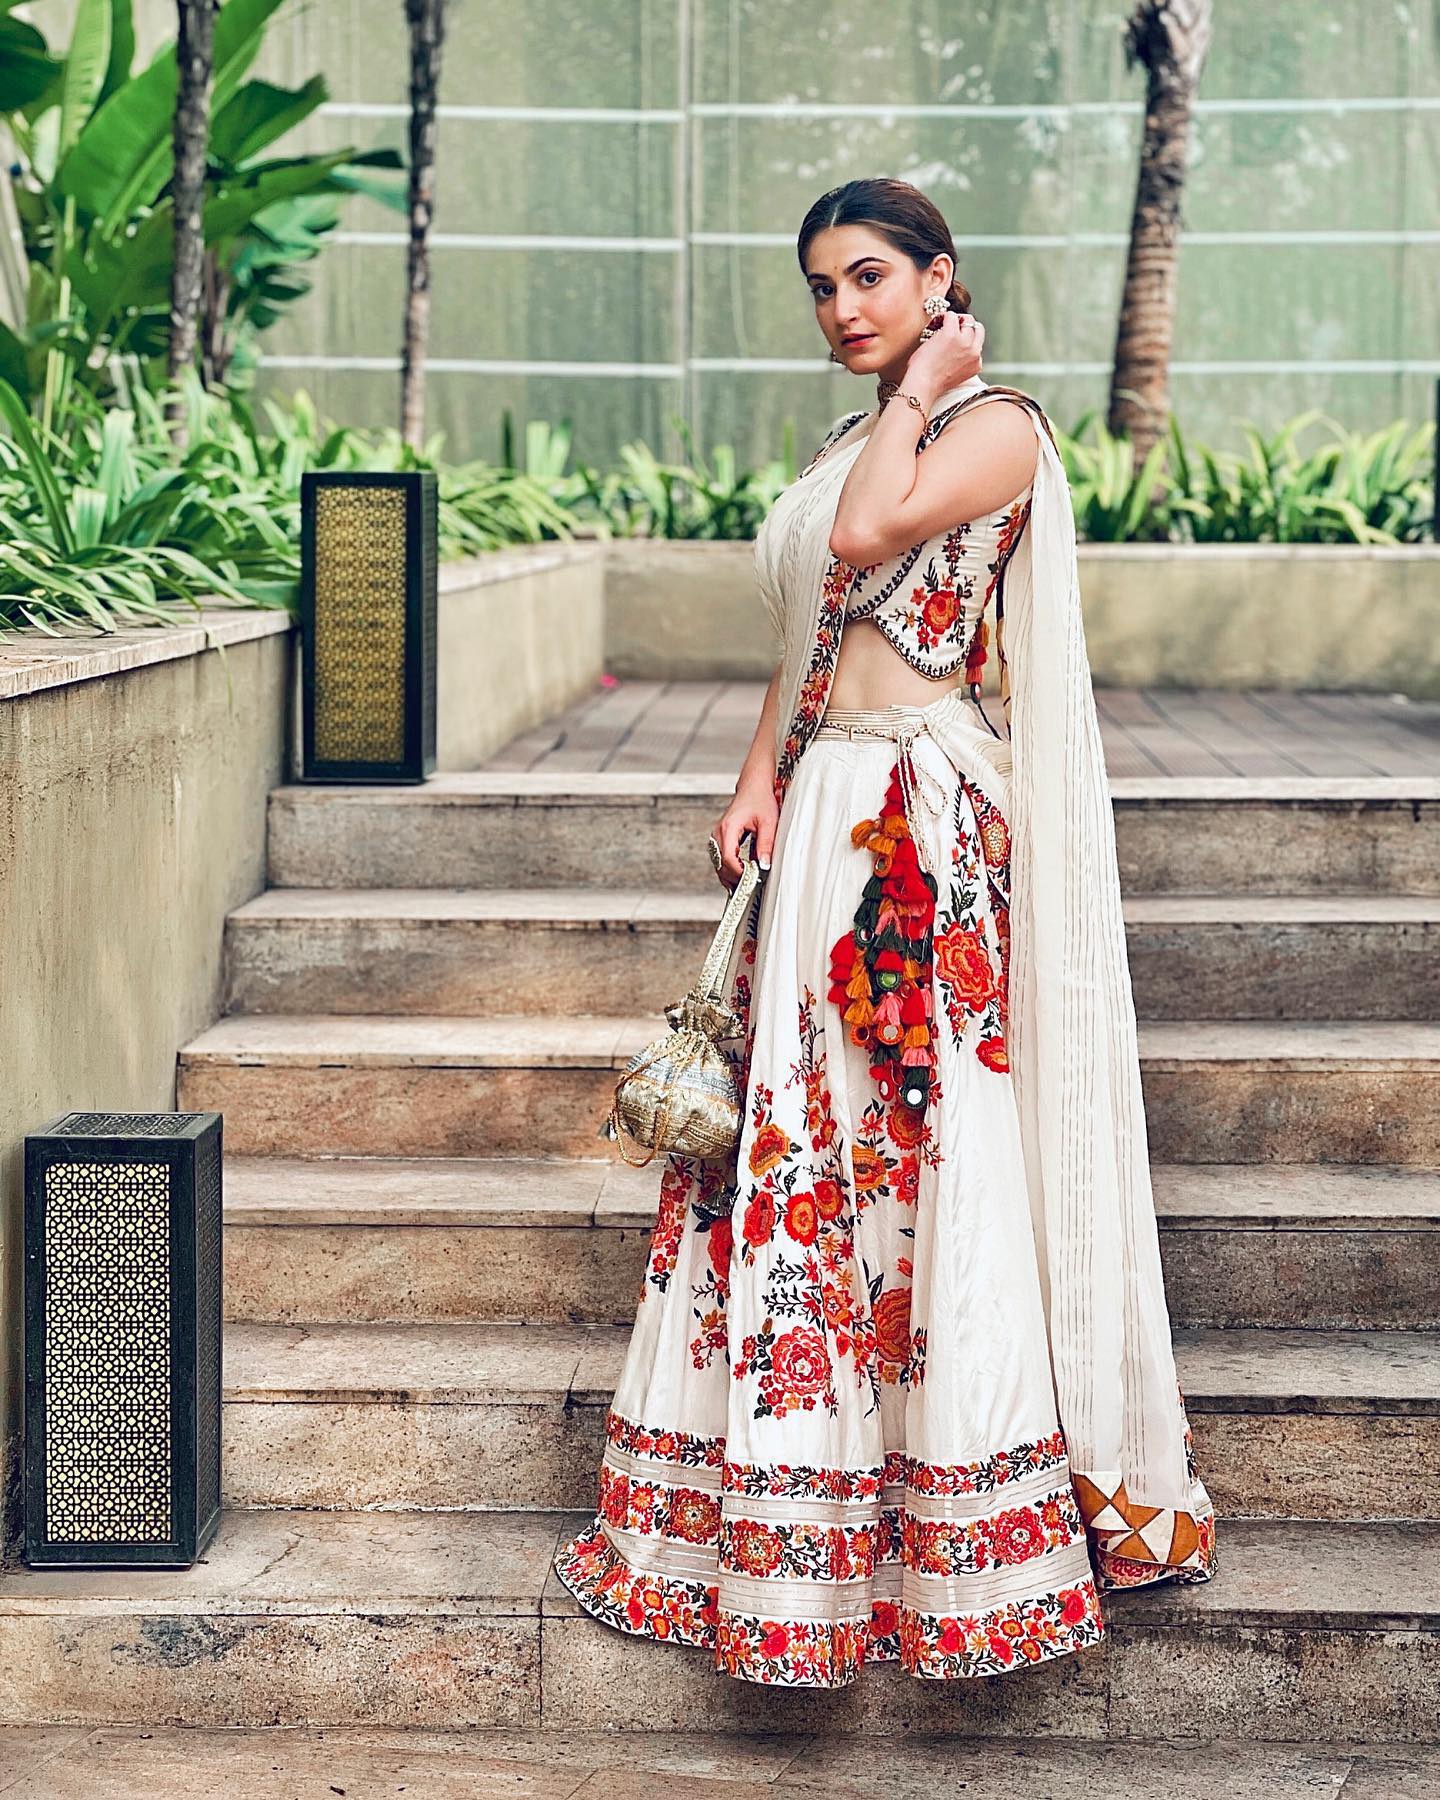 Shivaleeka Oberoi Is A Vision To Behold In A Vibrant Floral Embroidered White Lehenga With Potali Handbag - Exclusive Outfits & Looks